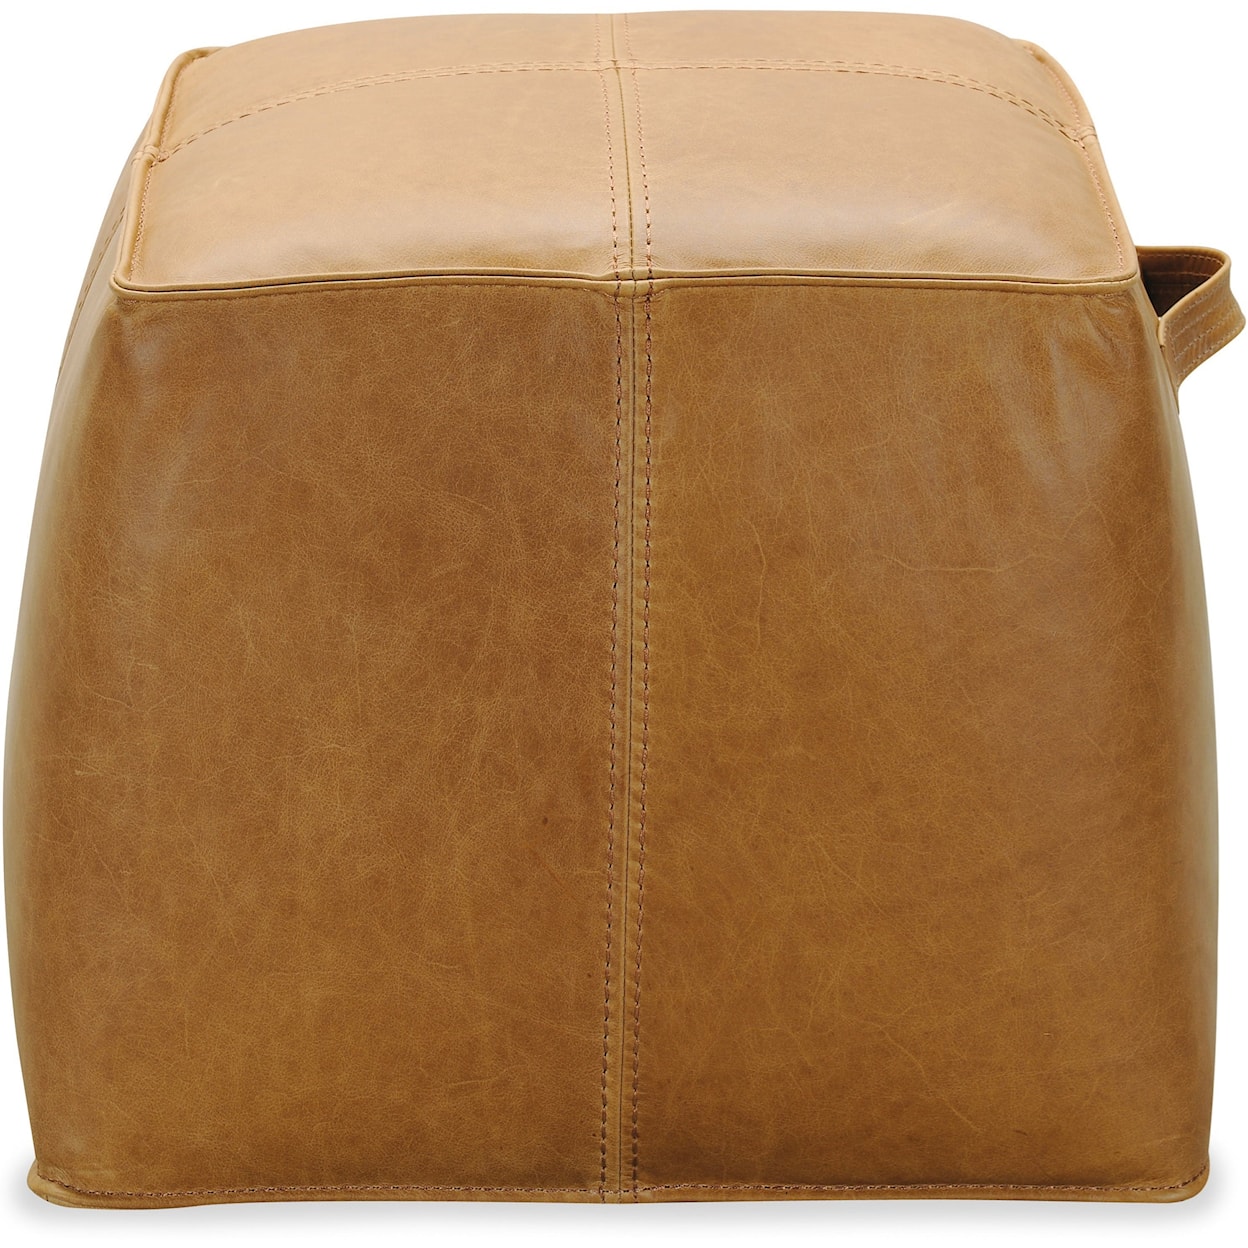 Hooker Furniture Cocktail Ottomans Dizzy Small Leather Ottoman